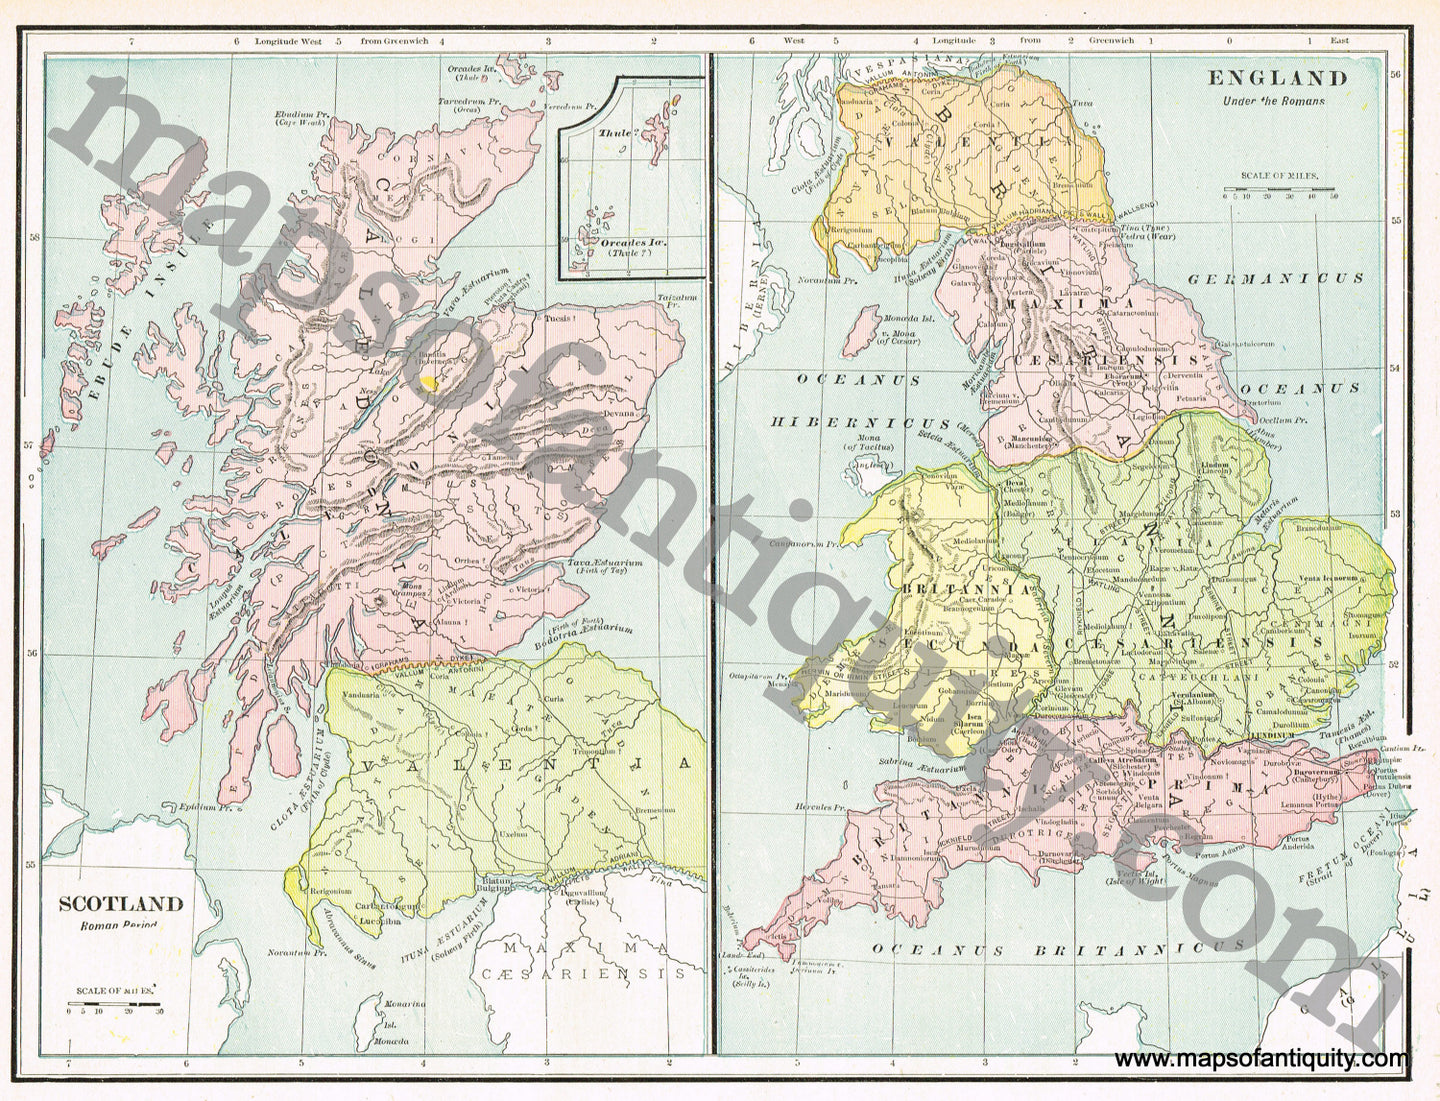 Antique-Printed-Color-Map-Scotland-Roman-Period-and-England-Under-the-Romans-Europe-Scotland-England-1894-Cram-Maps-Of-Antiquity